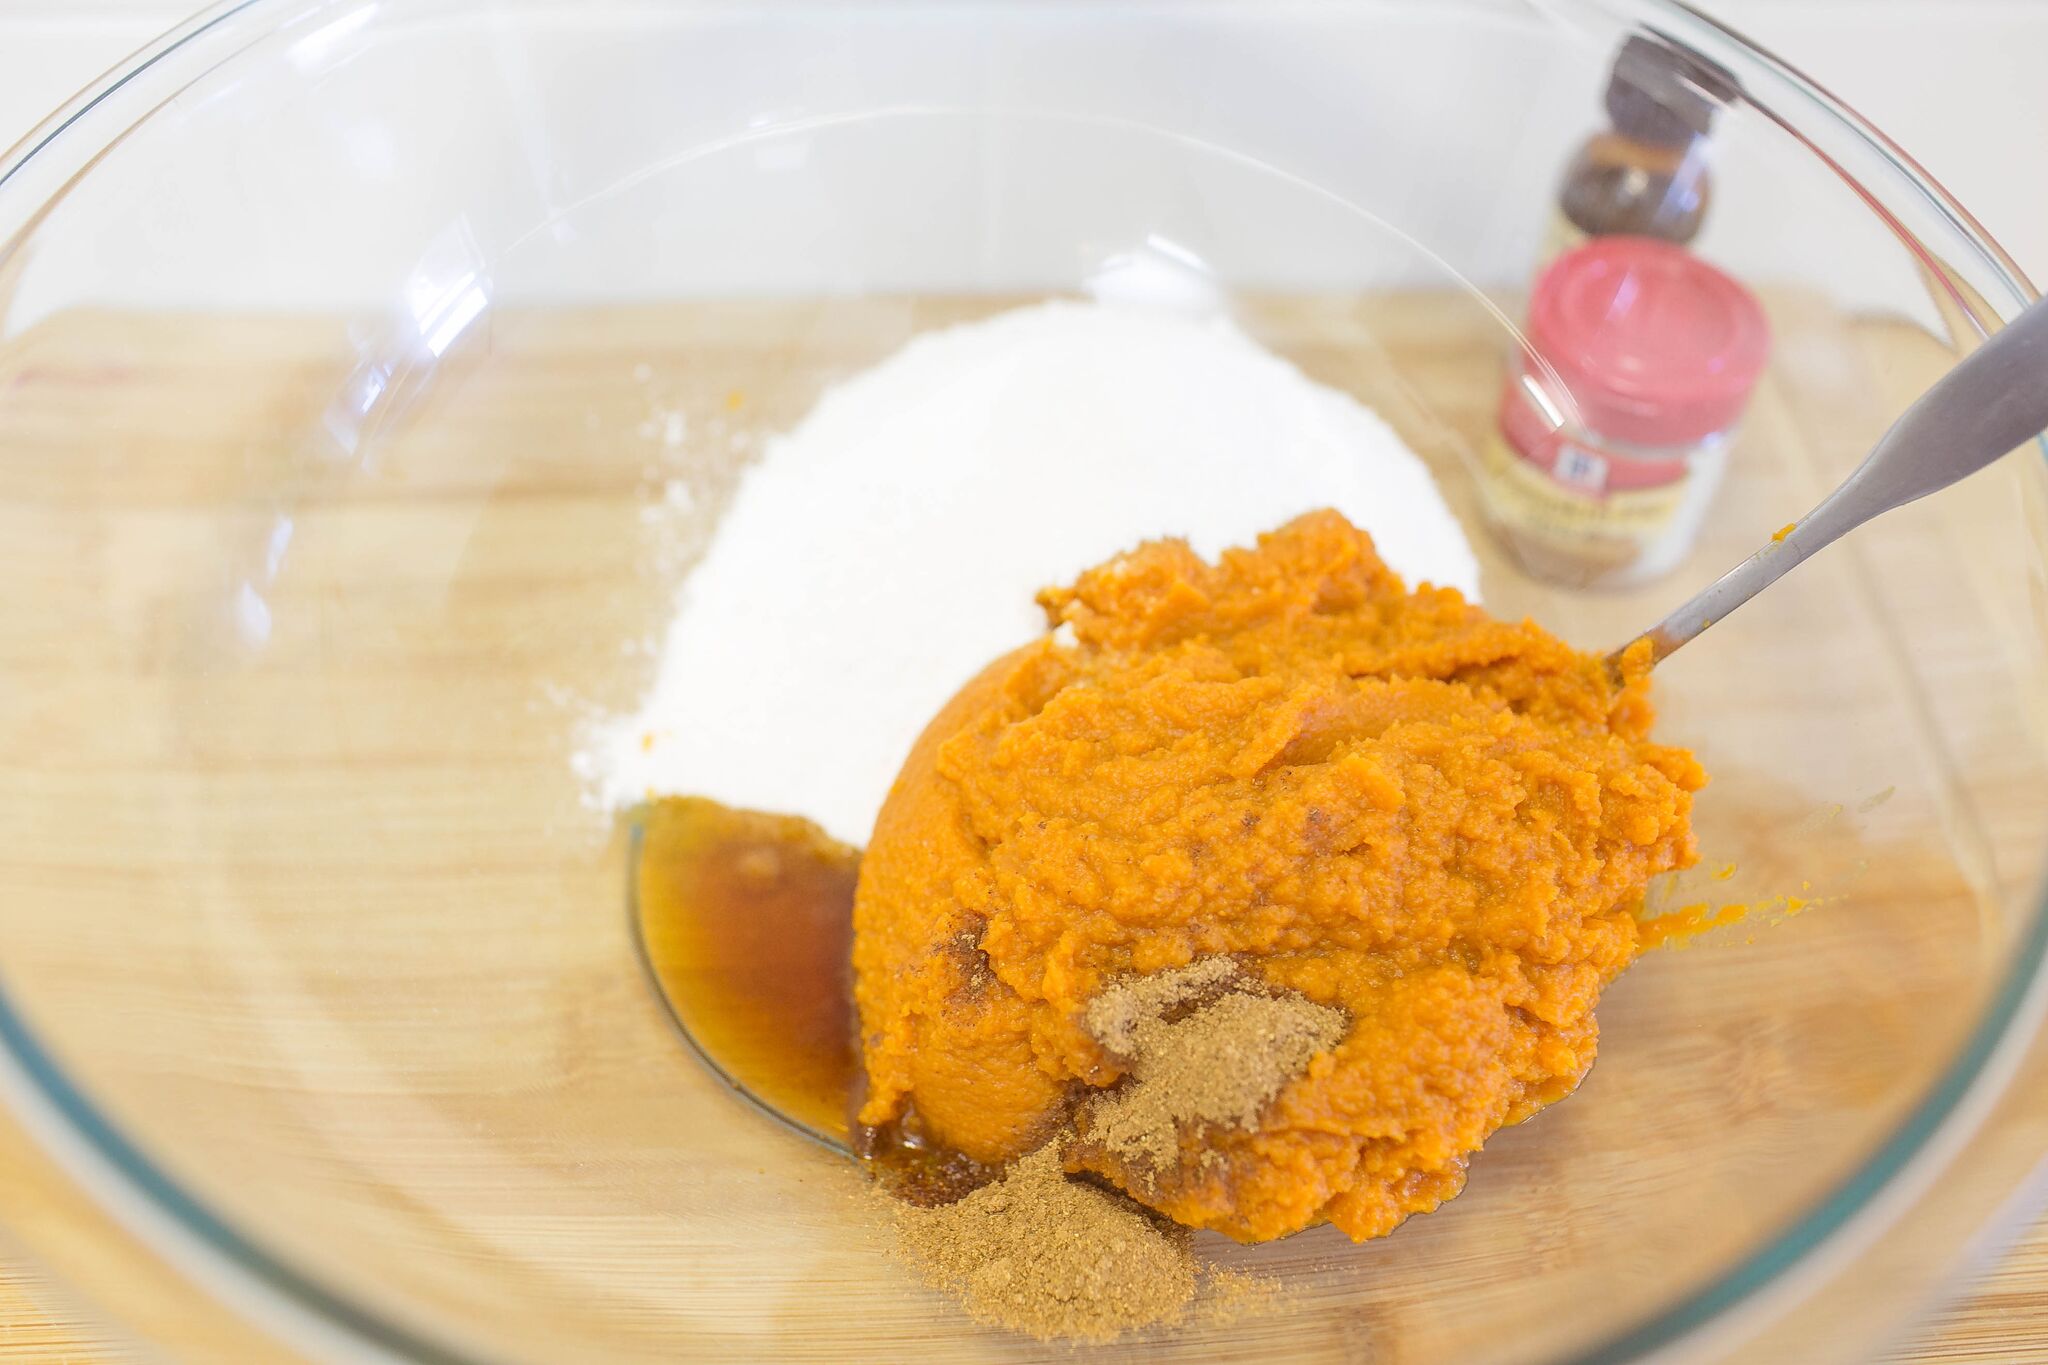 In a large bowl, mix together the pumpkin puree, instant pudding mix, vanilla extract, and pumpkin spice.